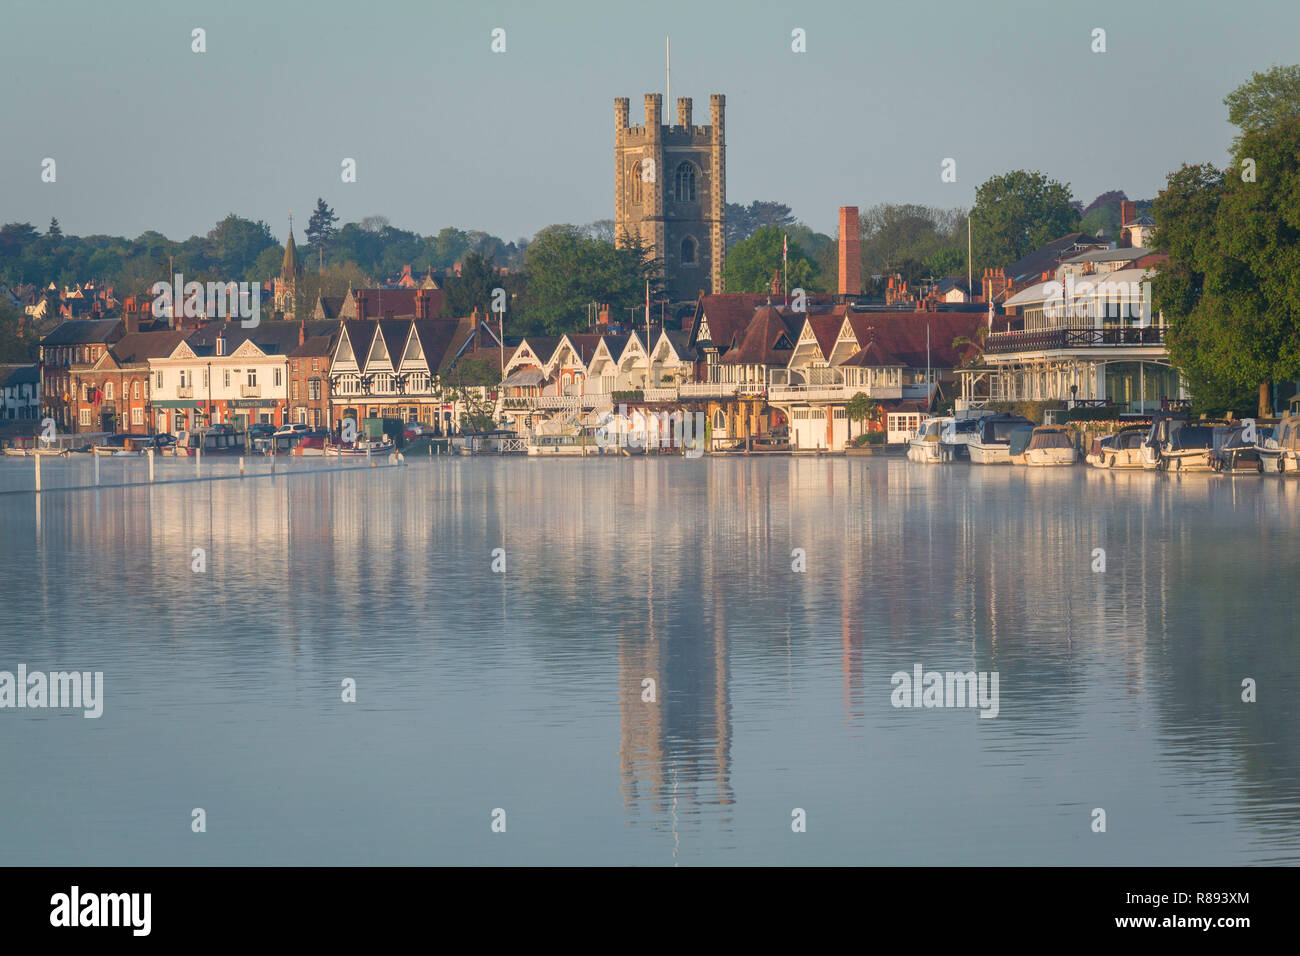 The historic picturesque Thameside town of Henley-on-Thames, Oxfordshire, viewed from across the River Thames with St. Mary's Church in the centre Stock Photo